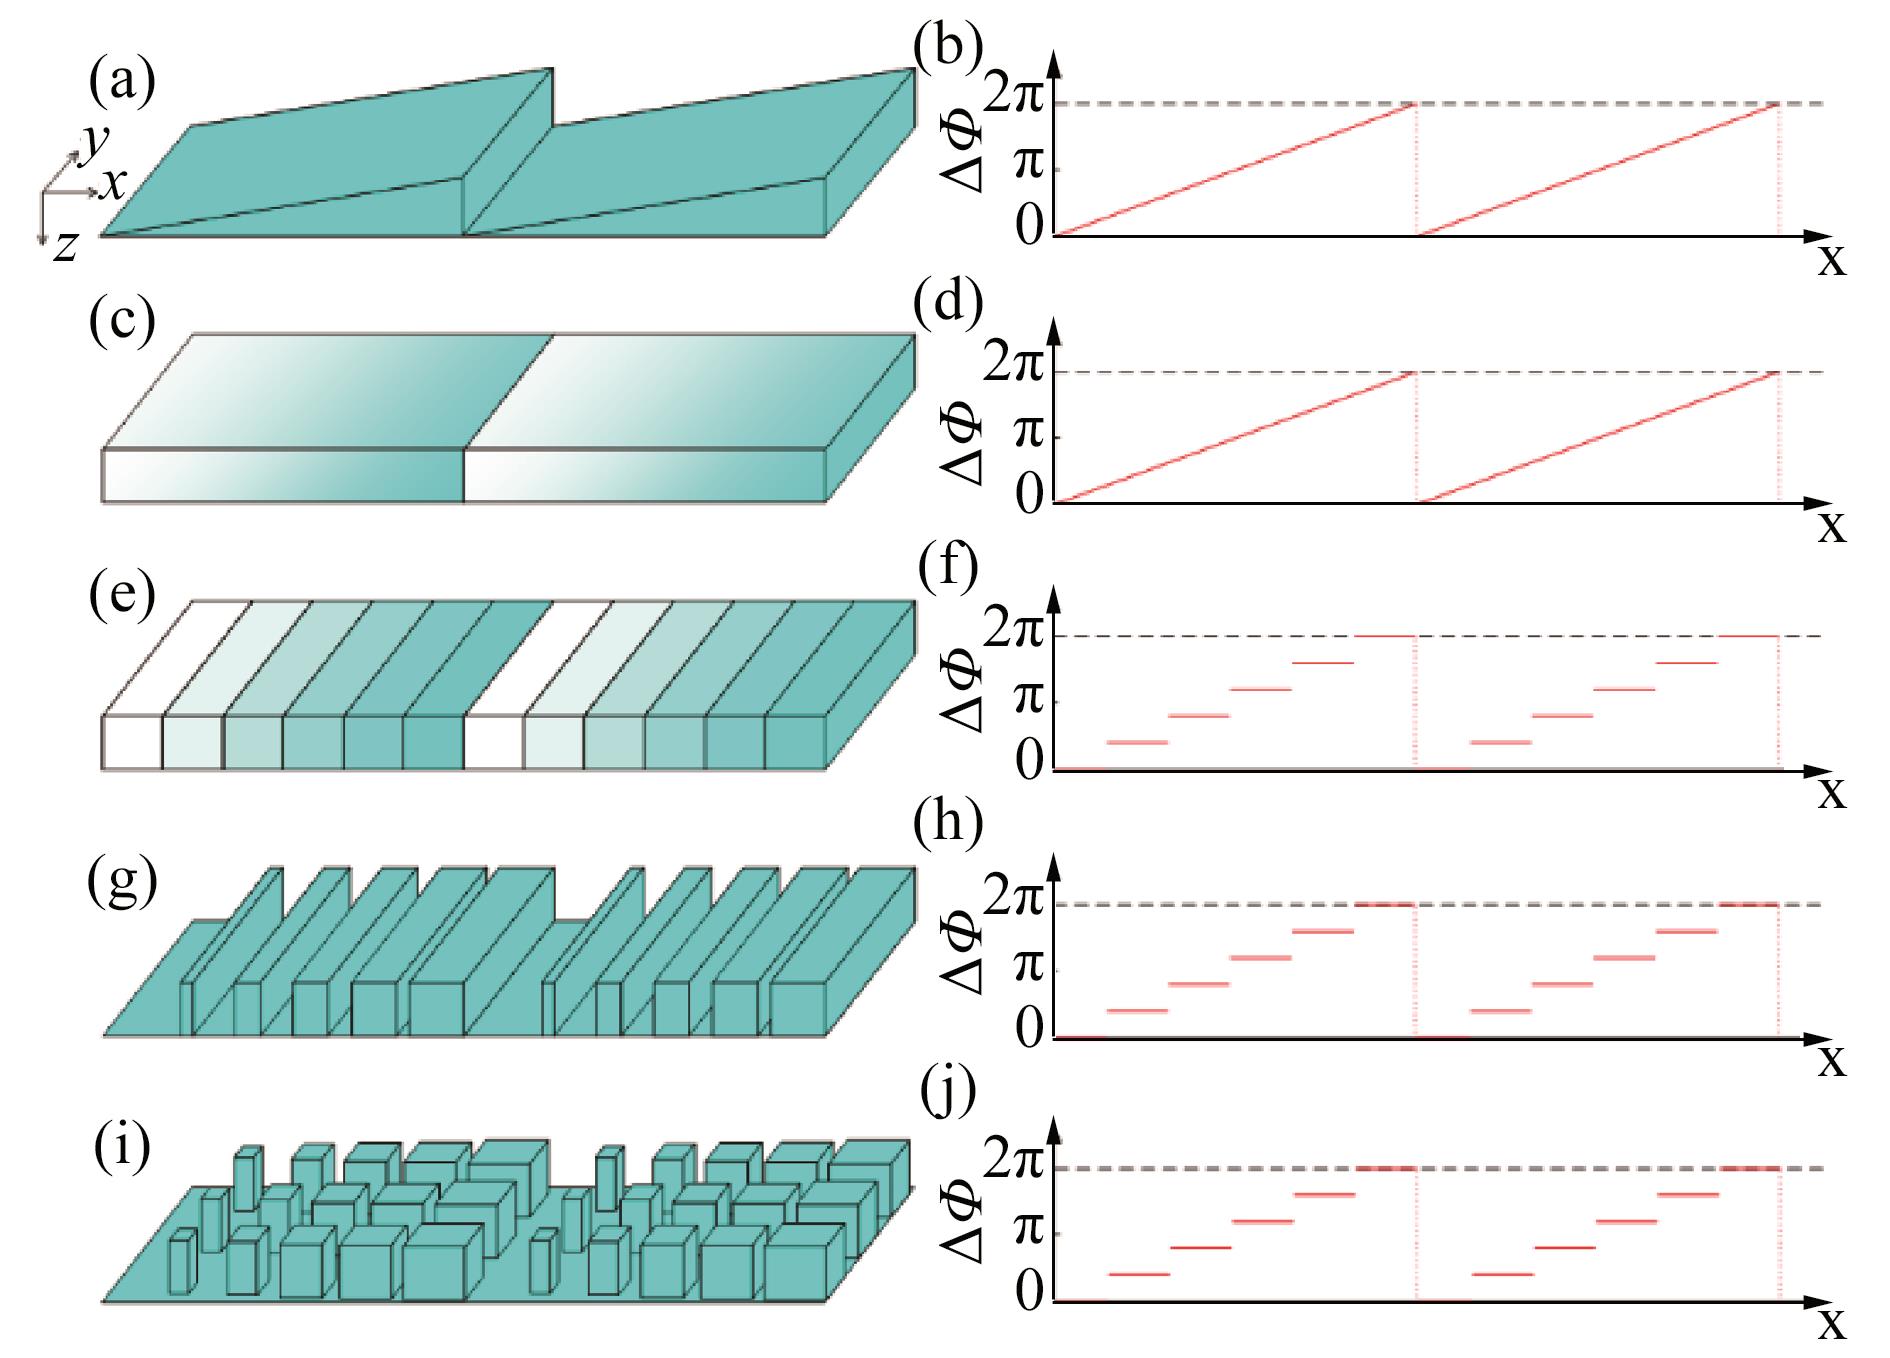 Transition from a saw-tooth blazed grating to a binary blazed grating with similar optical function （a） Saw-tooth groove shape, （b）pPhase change of normal incident light transmitting through （a）, （c） rectangular groove with continuously-changed refractive index, （d） phase change of （c）, （e） rectangular groove with discretely-changed refractive index, （f） phase change of （e）, （g） 1D binary groove shape, （h） phase change of （g）, （i） 2D binary groove shape, （j） Phase change of （i）